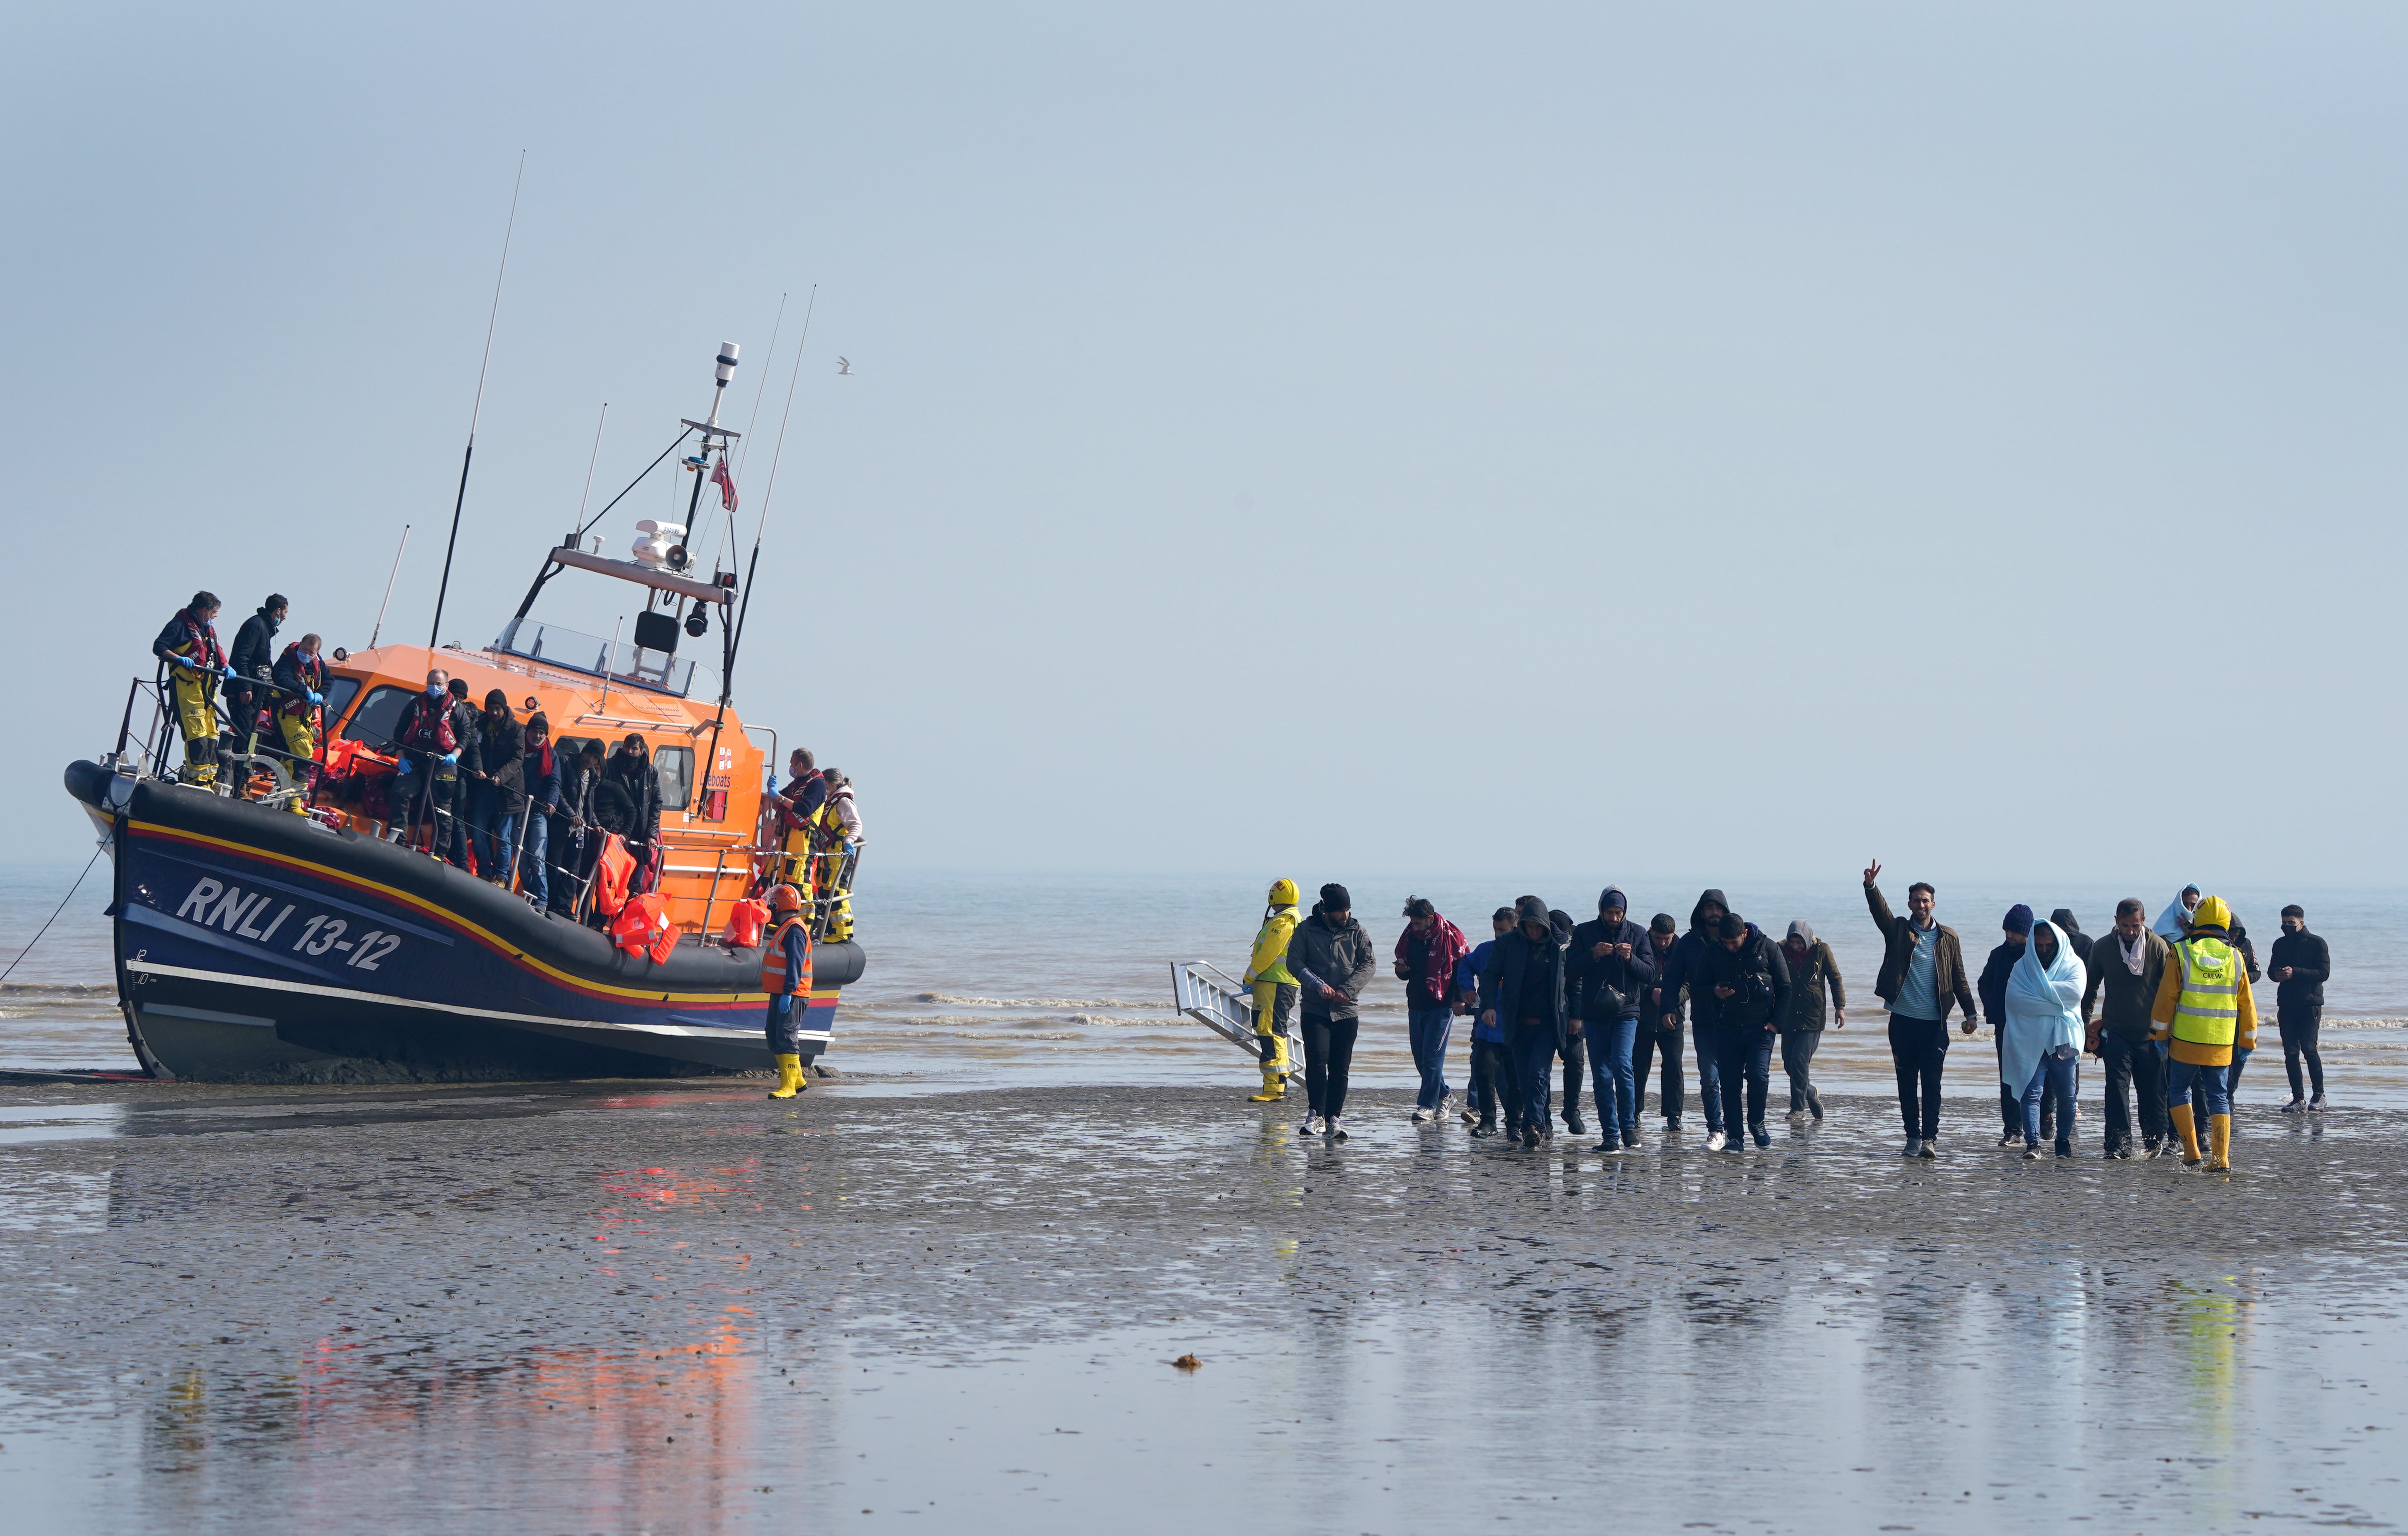 A group of people are guided up the beach after being brought into Dungeness, Kent, onboard the RNLI Lifeboat following a small boat incident in the Channel (Gareth Fuller/PA)